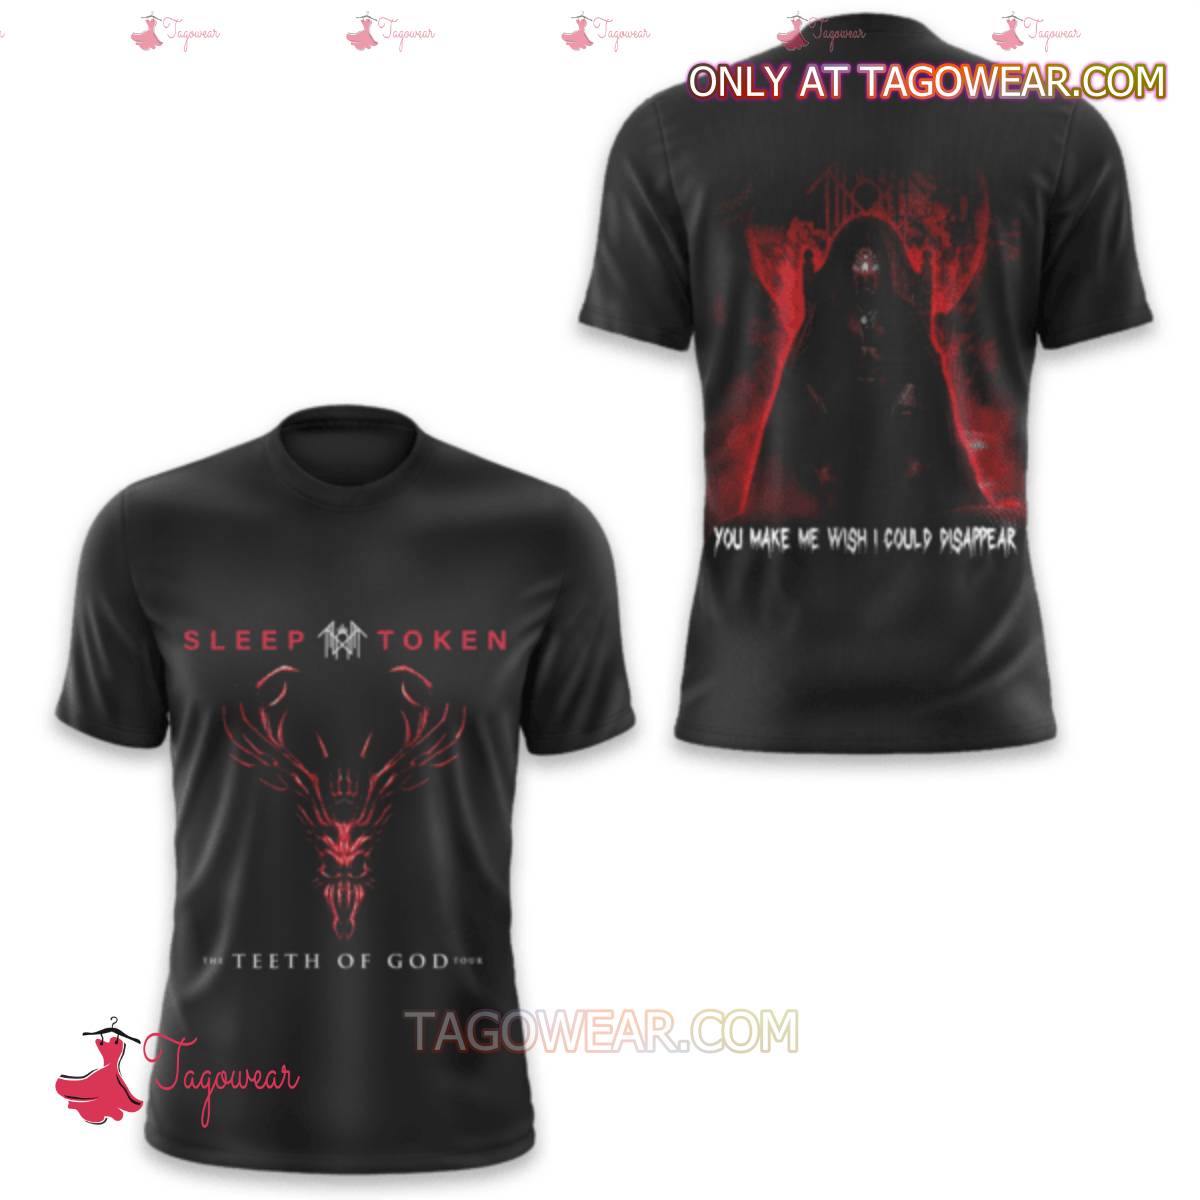 Sleep Token The Teeth Of God Tour You Make Me Wish I Could Disappear T-shirt, Hoodie